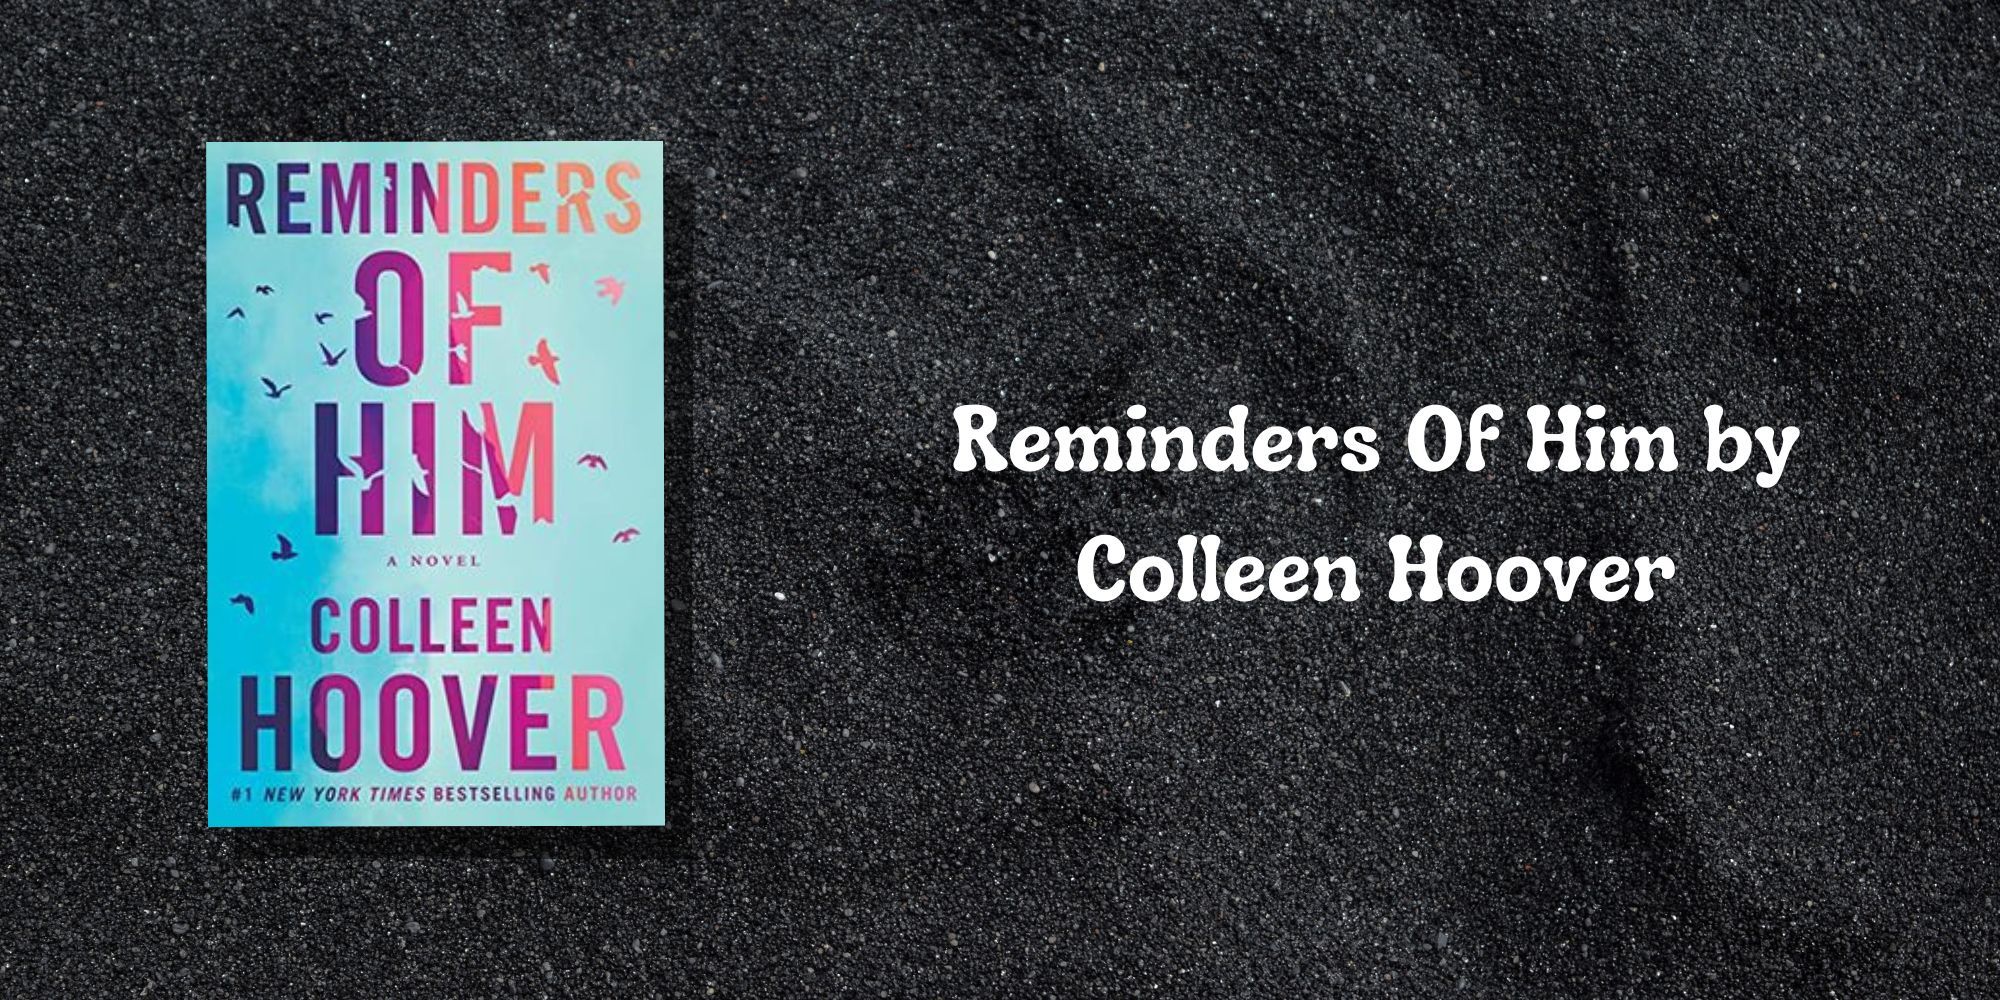 Reminders Of Him cover by Colleen Hoover